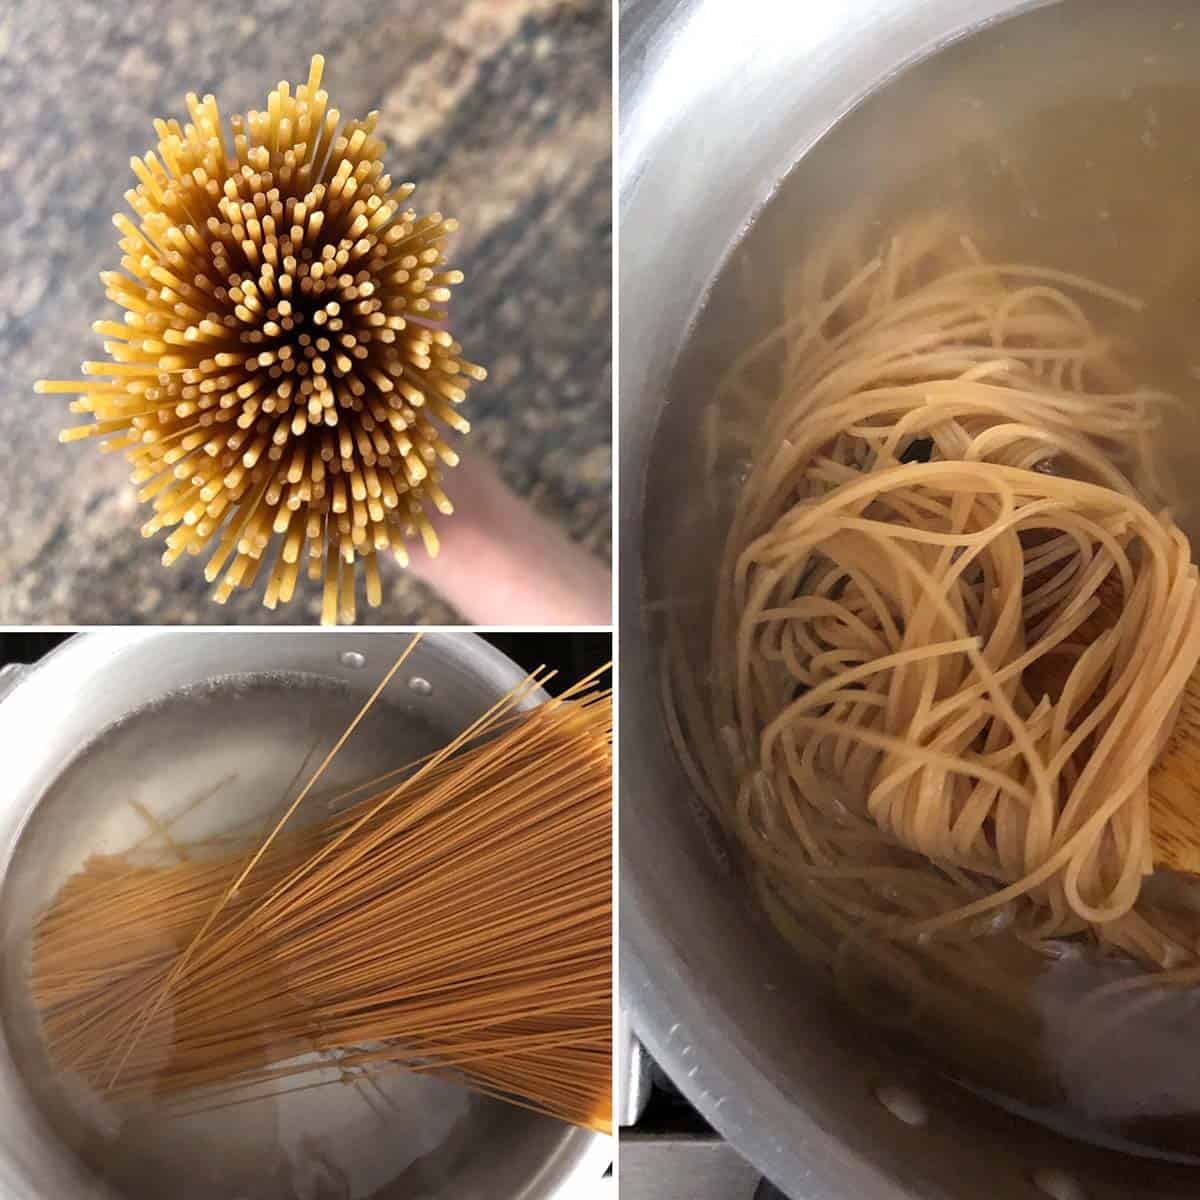 3 panel photo showing the cooking of spaghetti.